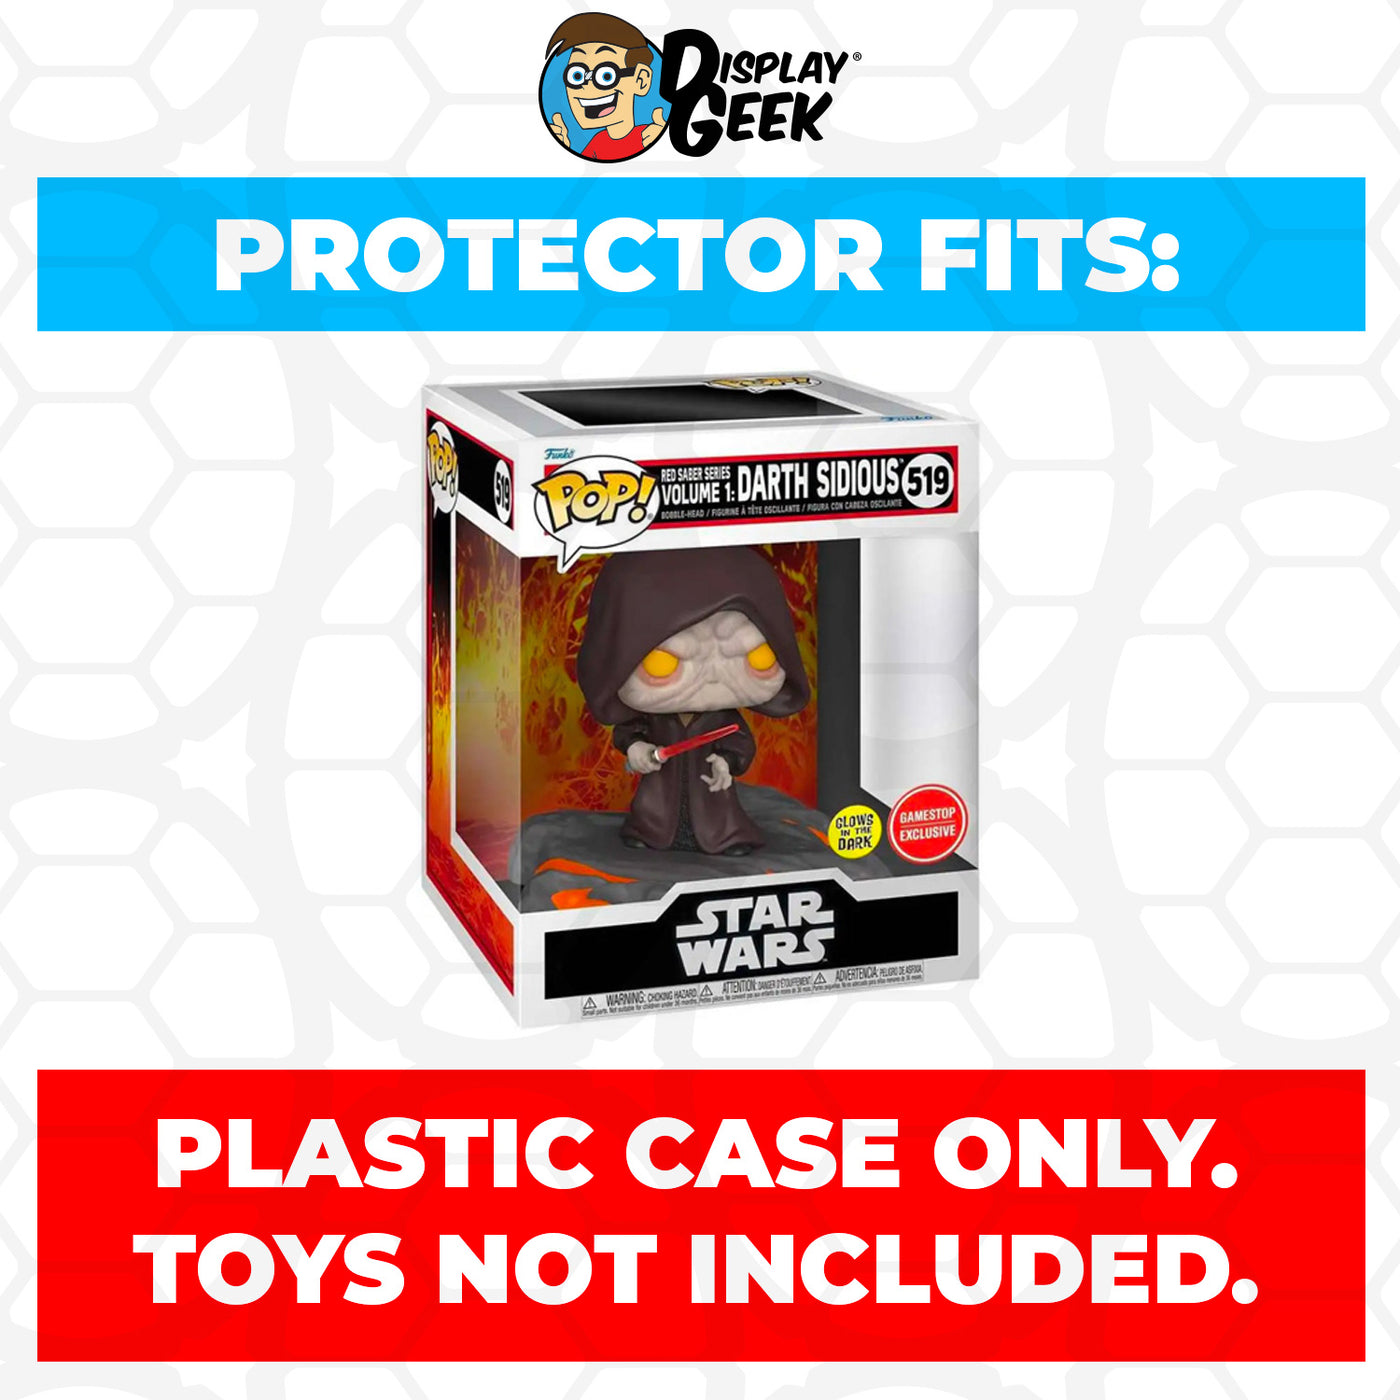 Pop Protector for Red Saber Series Volume 1 Darth Sidious Glow #519 Funko Pop Deluxe on The Protector Guide App by Display Geek